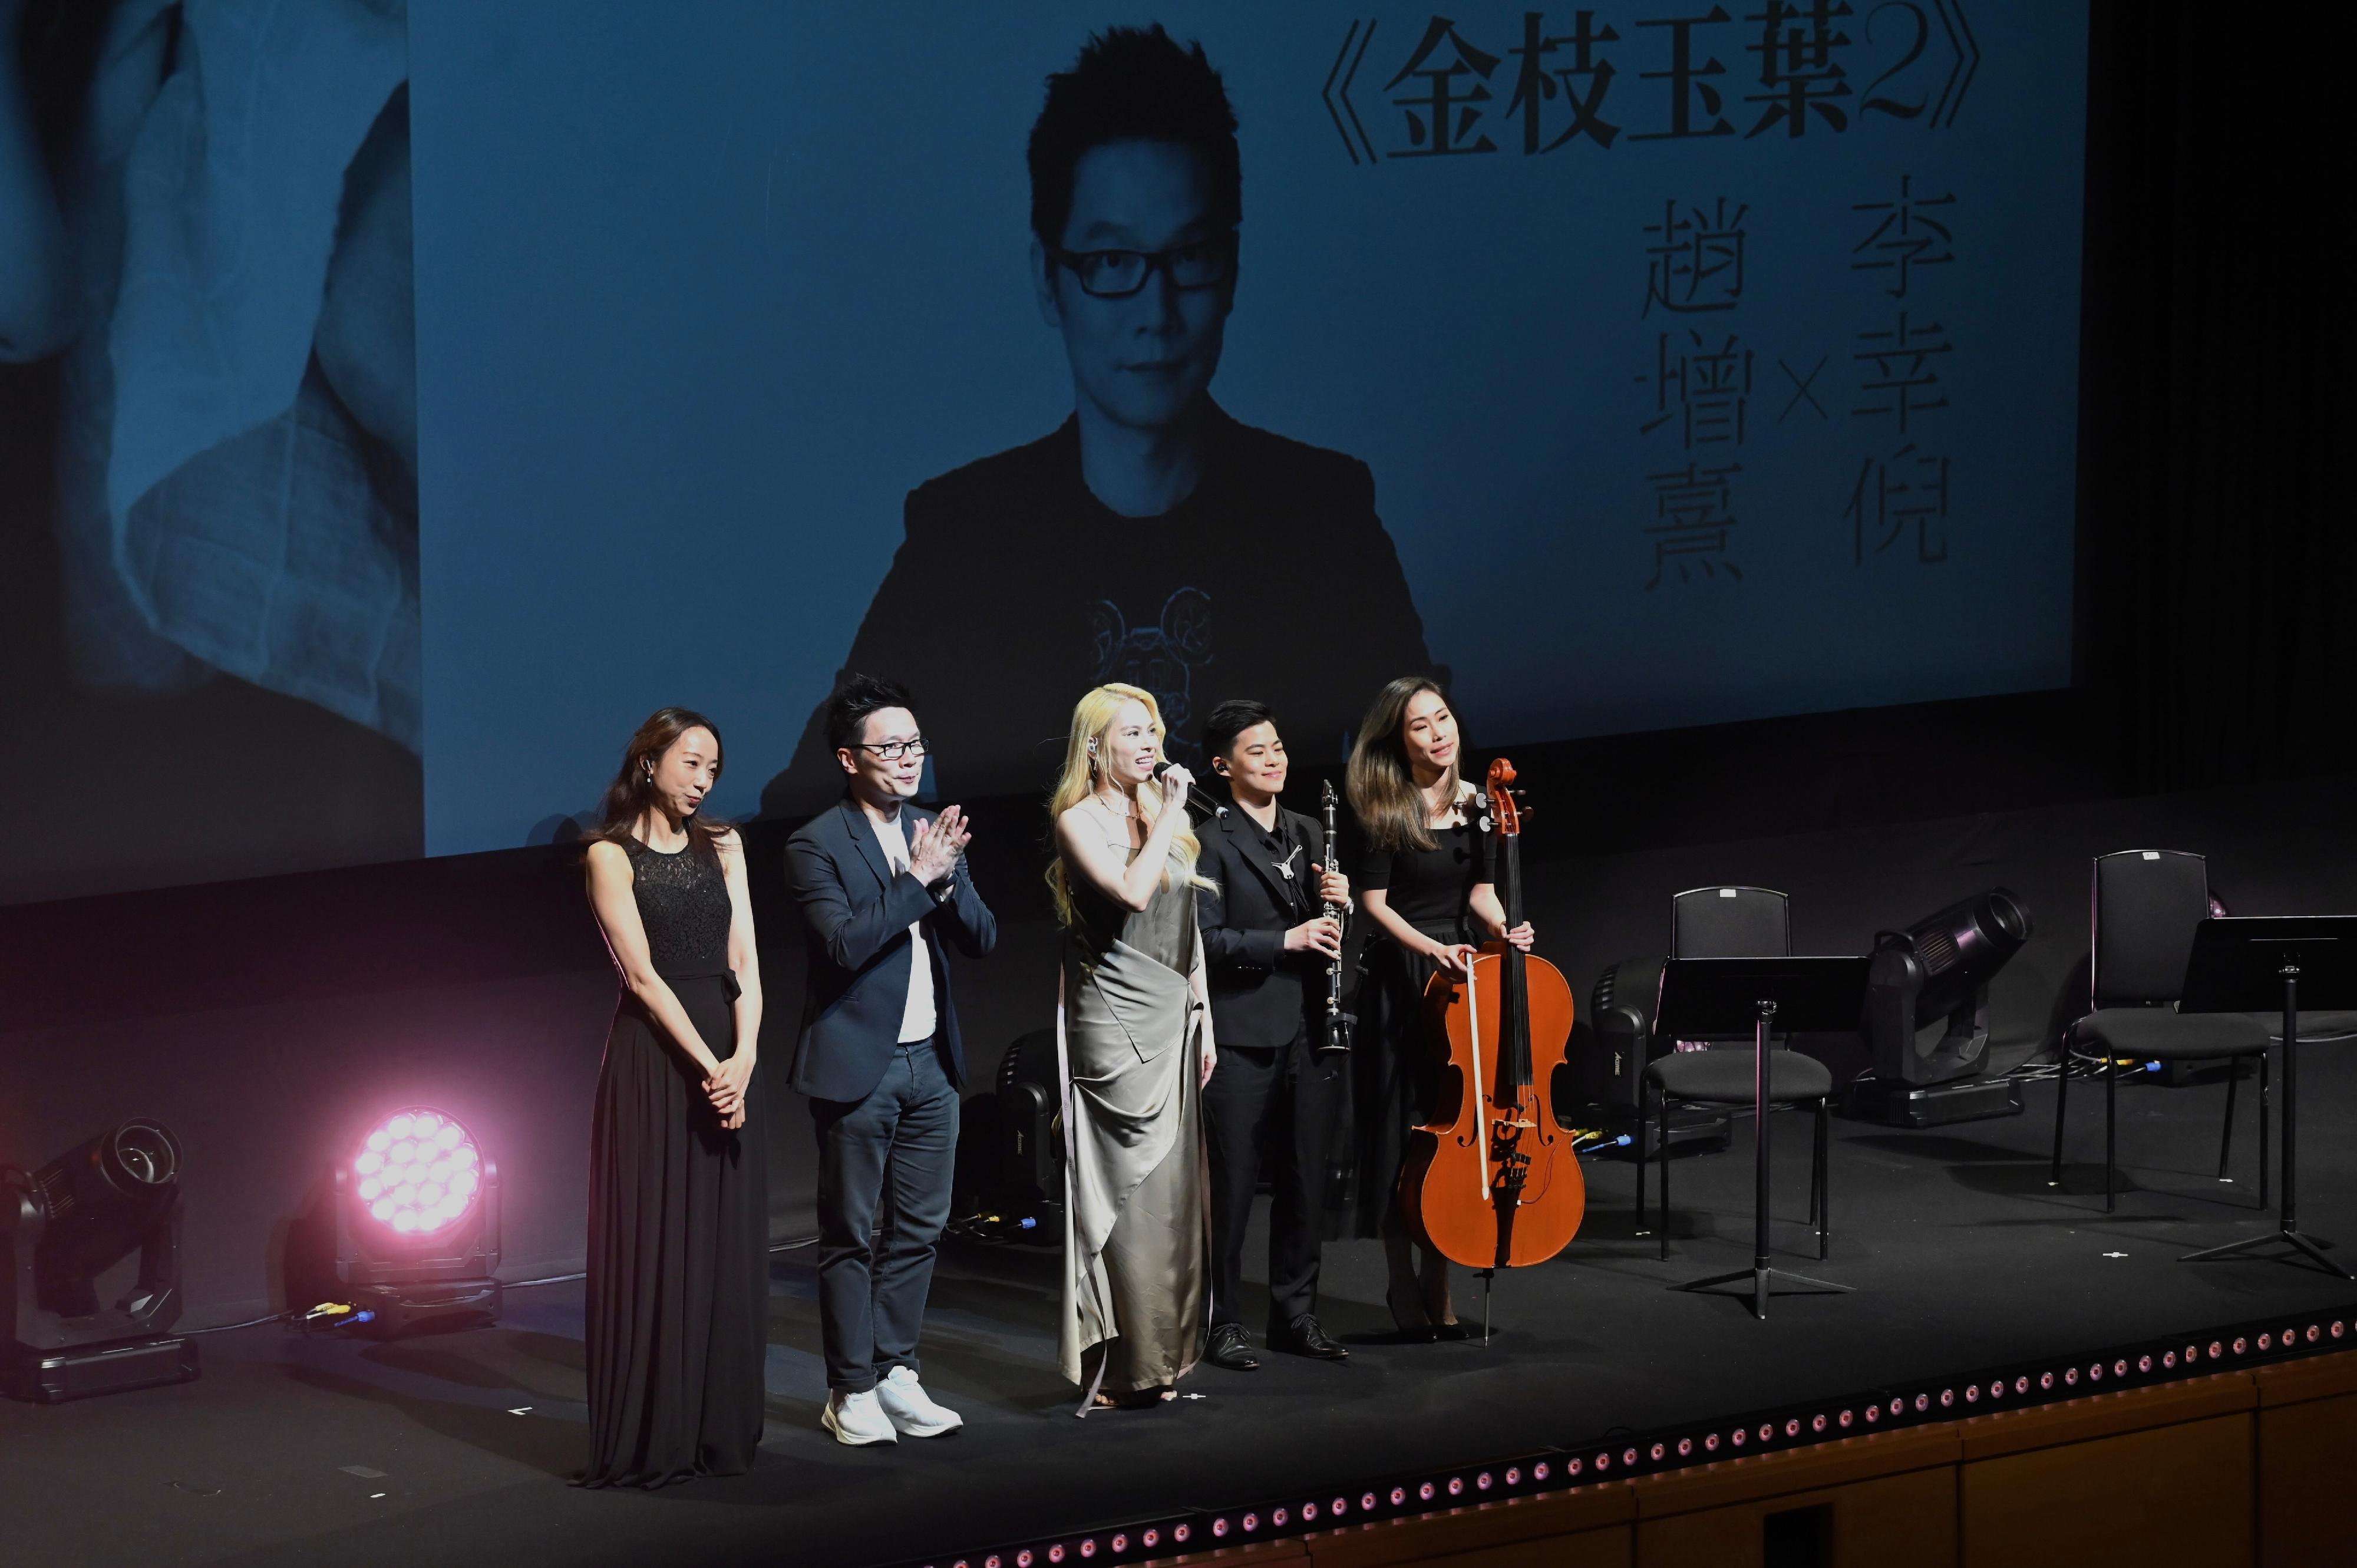 Organised by the Leisure and Cultural Services Department, the opening ceremony of the Hong Kong Pop Culture Festival 2023 was held at the Grand Theatre of the Hong Kong Cultural Centre today (April 22). Photo shows pop singer Gin Lee (centre) and renowned music producer Chiu Tsang-hei (second left) on stage receiving applause after their performance at the opening programme of the Hong Kong Pop Culture Festival 2023.